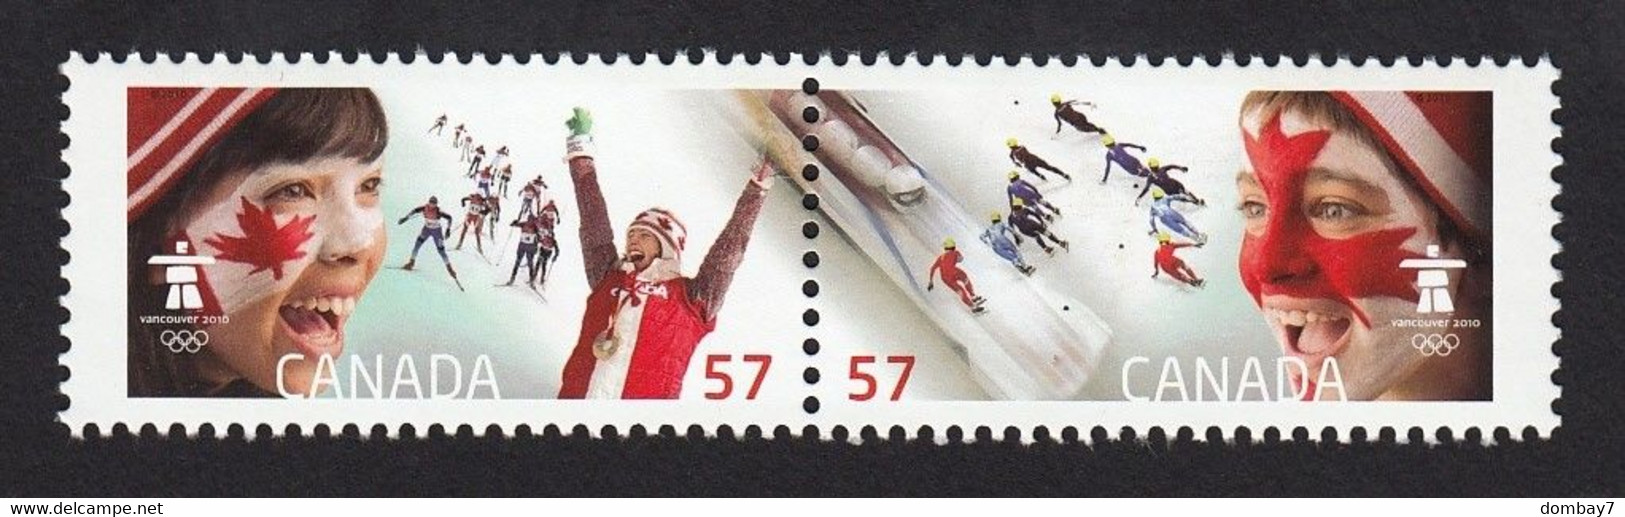 Qt. VANCOUVER OLYMPIC WINTER GAMES = CROSS-COUNTRY SKIING, BOBSLEIGH = Pair From Souvenir Sheet MNH Canada 2010 #2373a,b - Invierno 2010: Vancouver